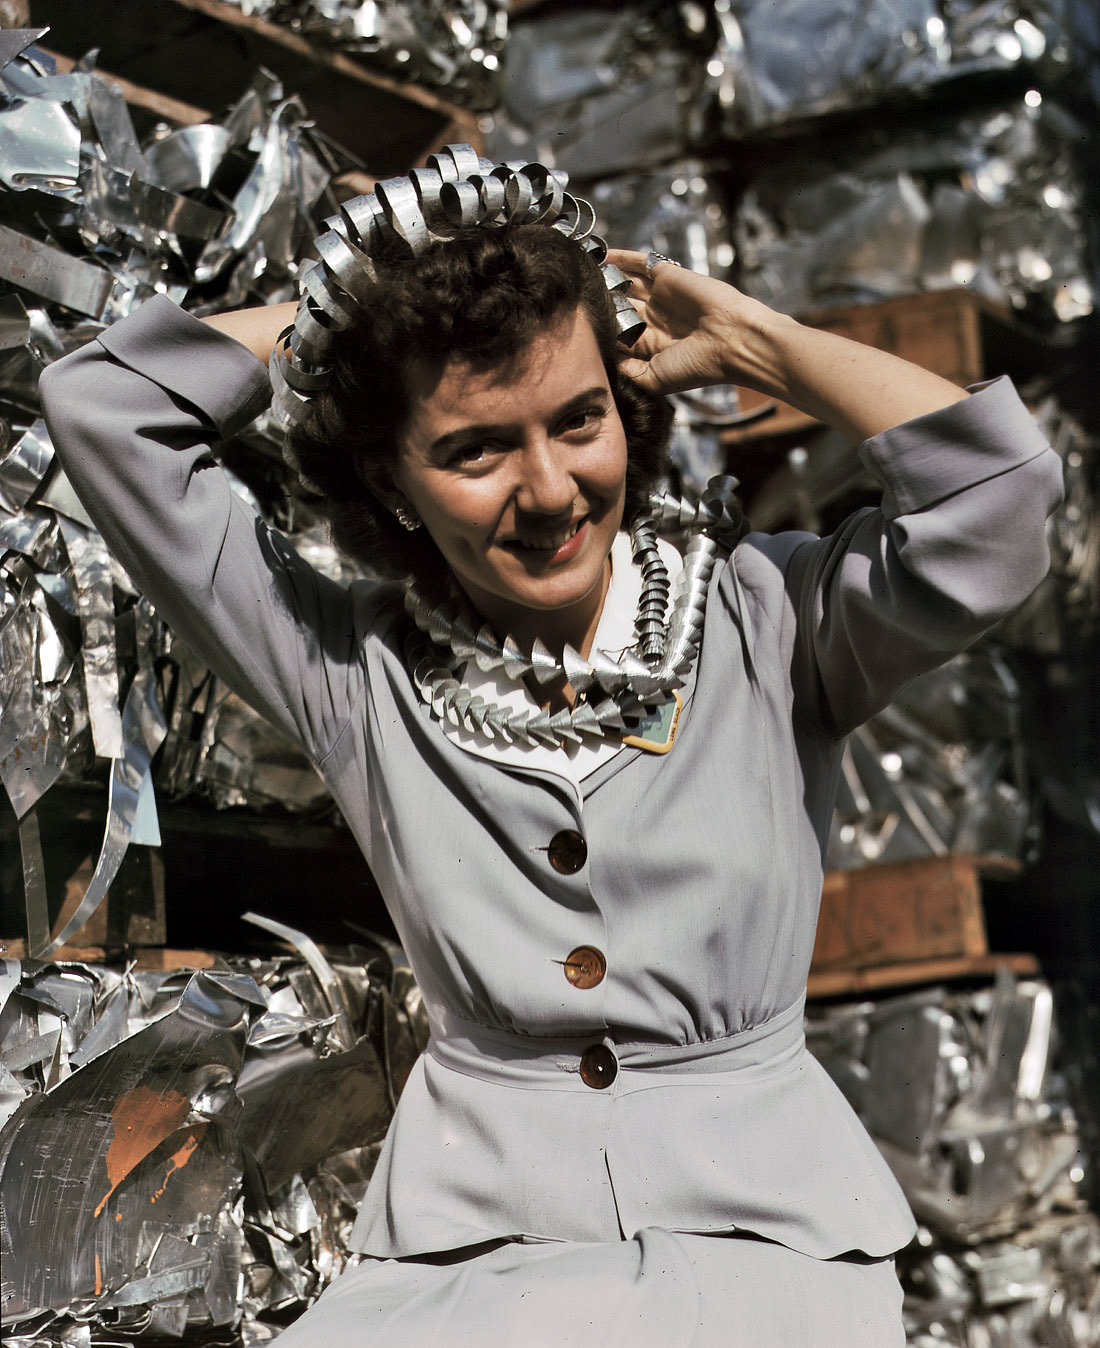 October 1942. "Office employee Annette del Sur publicizing salvage campaign in yard of Douglas Aircraft Company, Long Beach, California. The earrings and hair ornaments are fashioned from aluminum turnings." View full size. 4x5 Kodachrome transparency by Alfred Palmer for the Office of War Information.